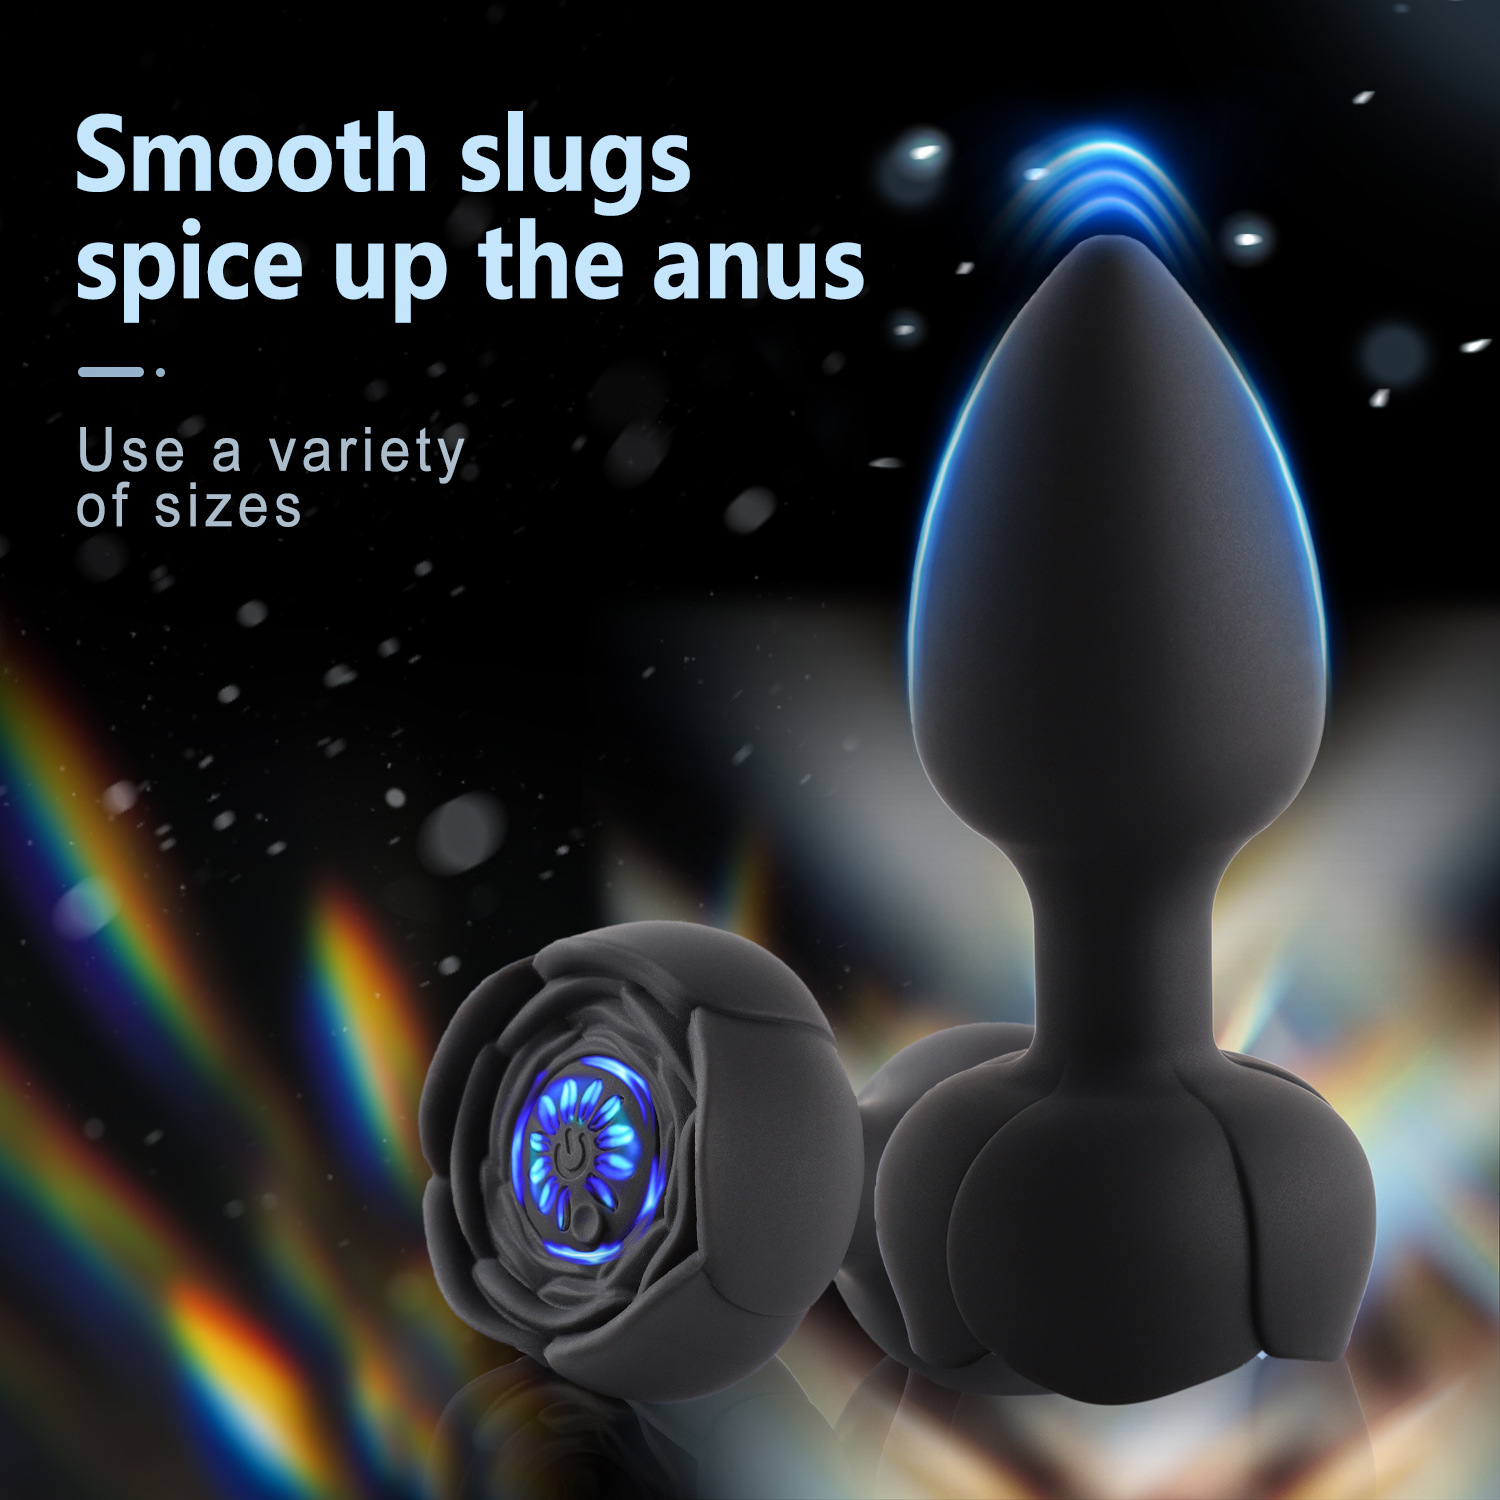 6.Black--Colorful glowing Adult Sex Toys